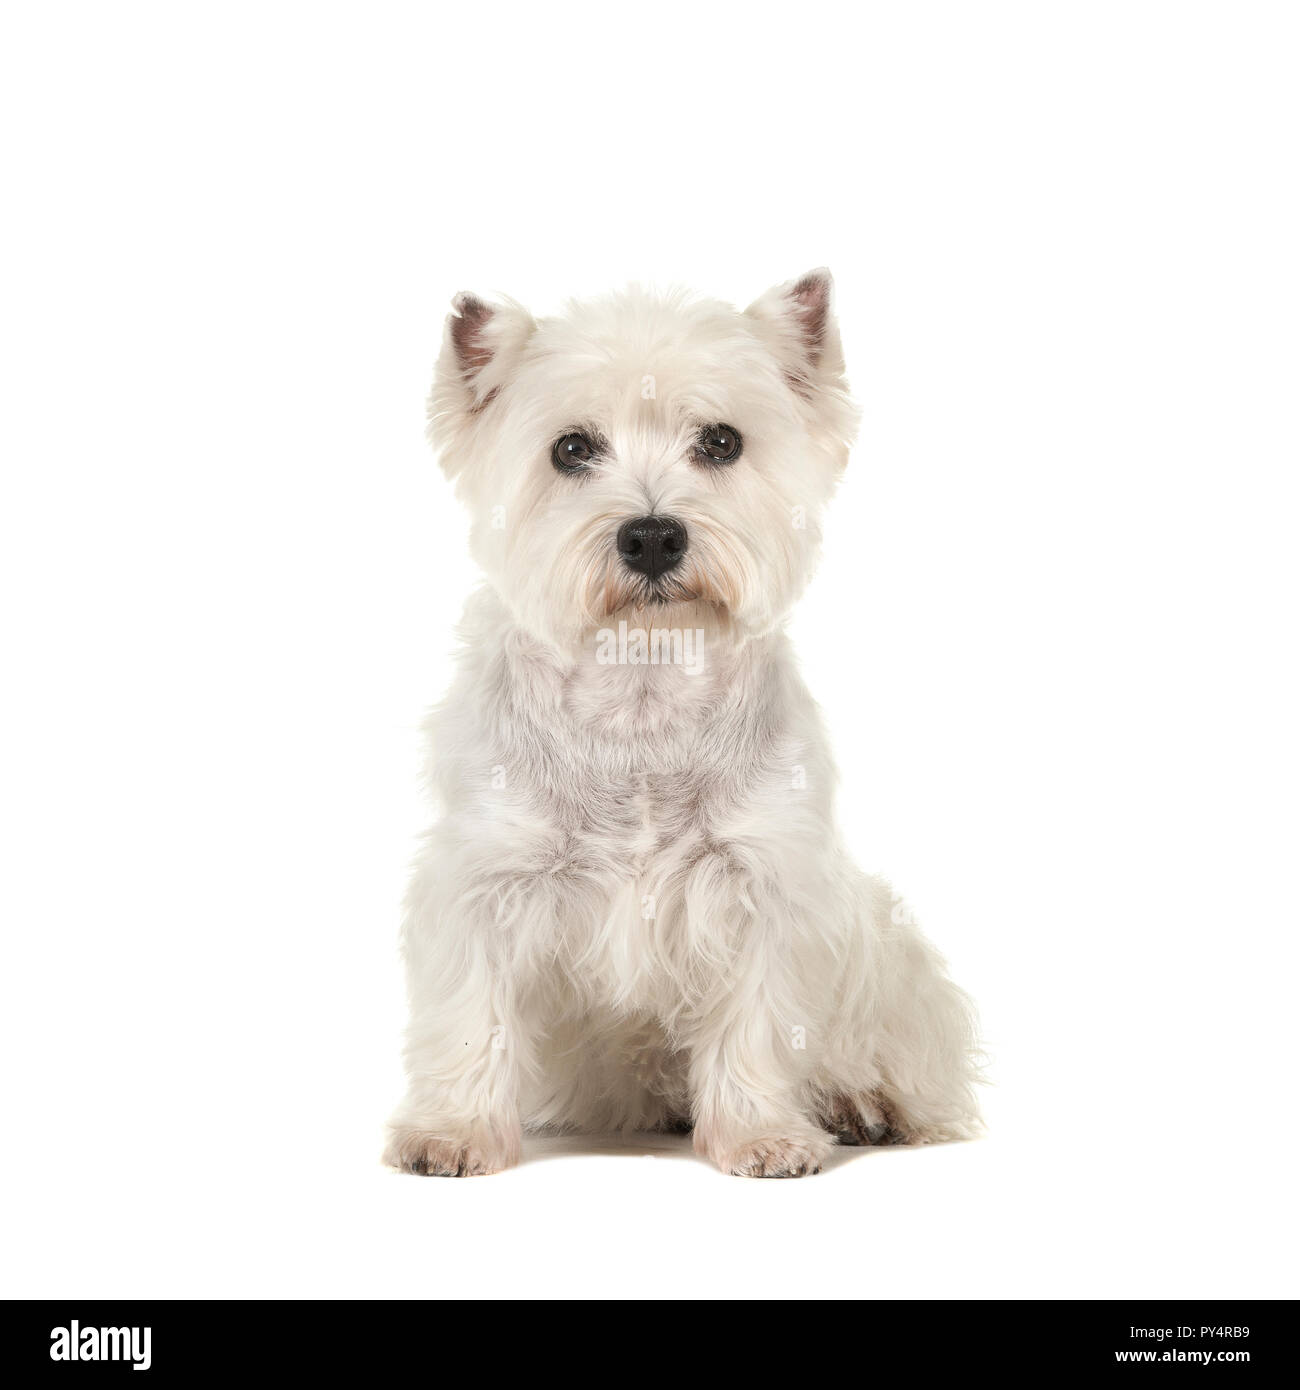 West highland white terrier or westie dog sitting looking at the camera isolated on a white background Stock Photo